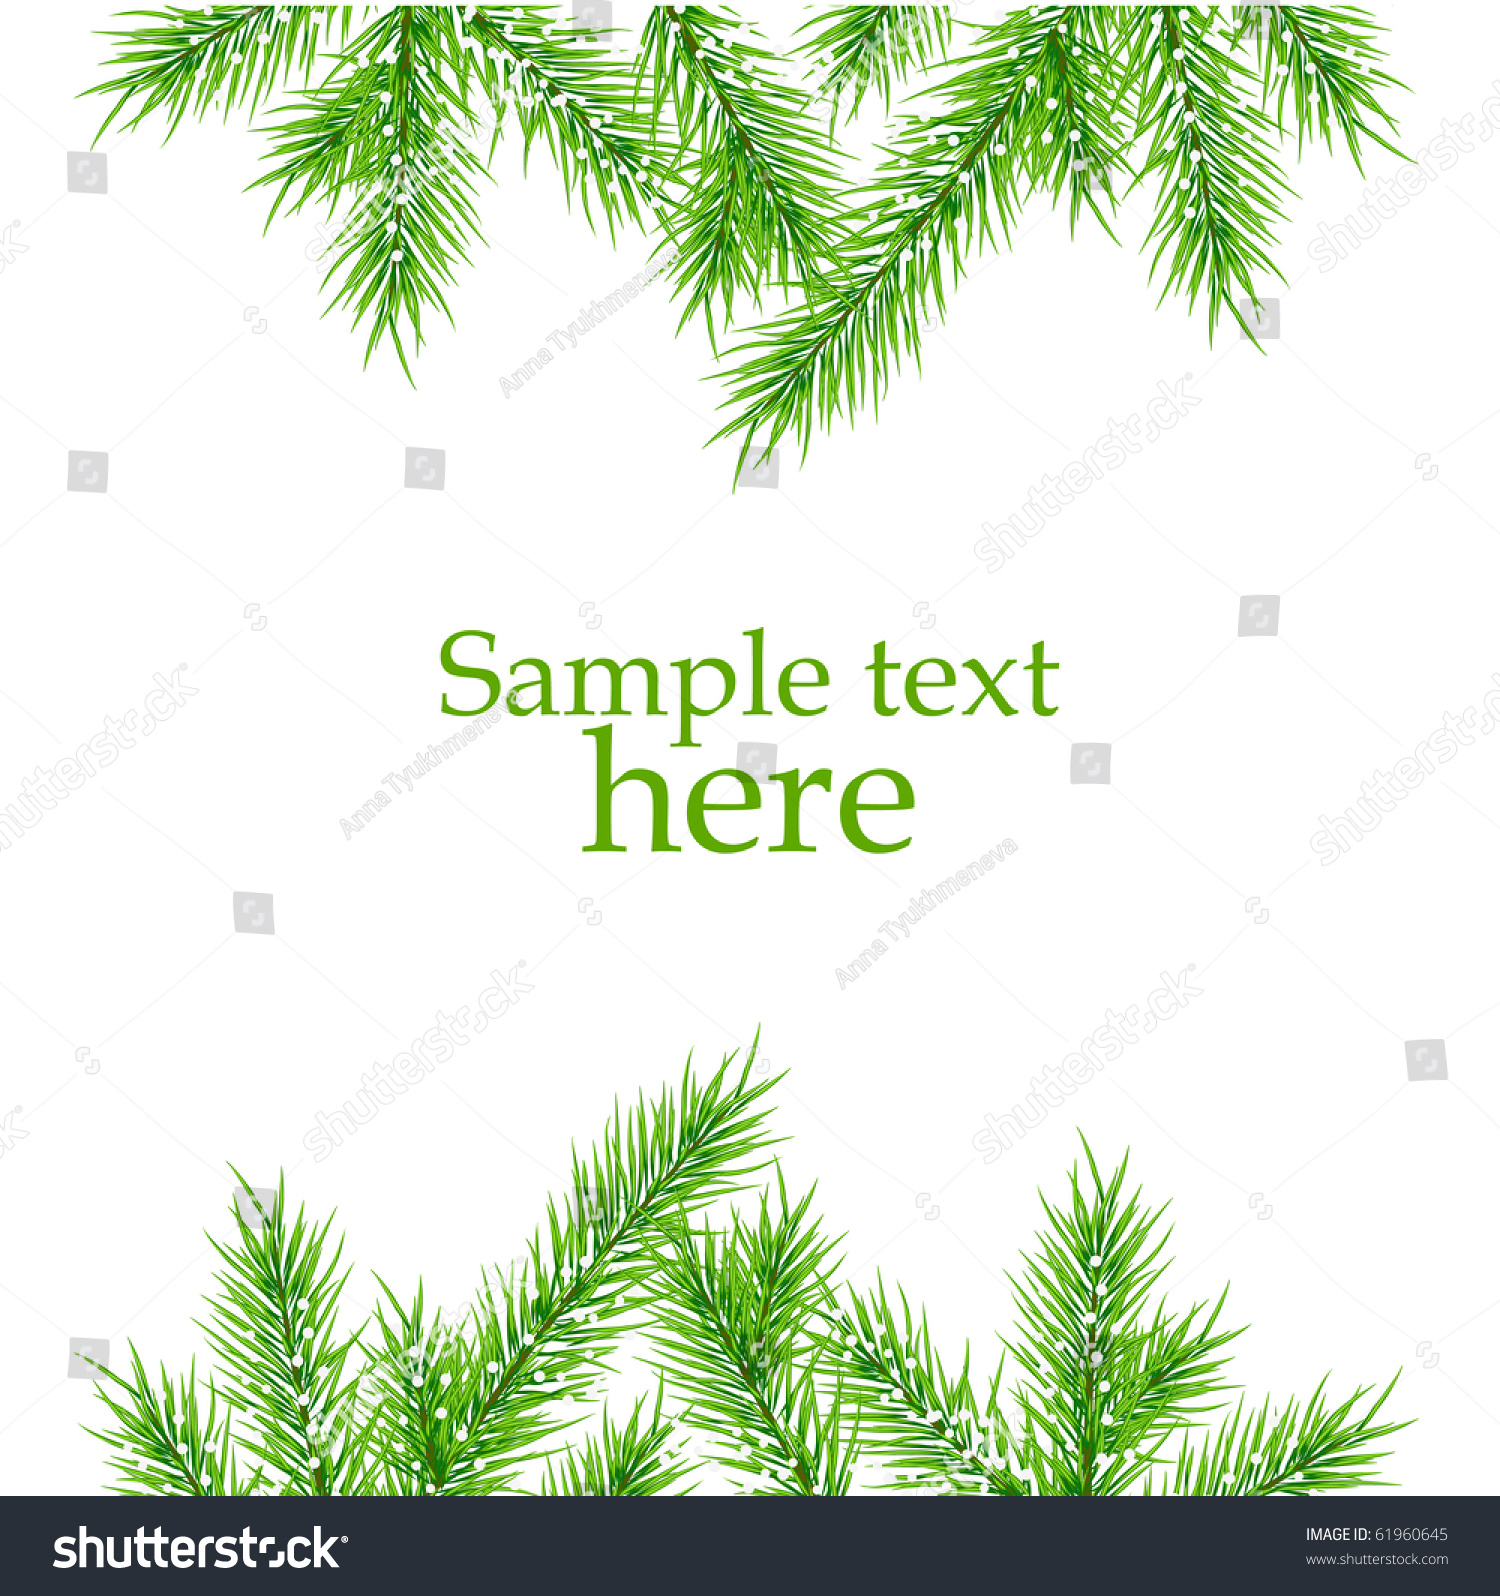 xmas tree branches vector background #61960645